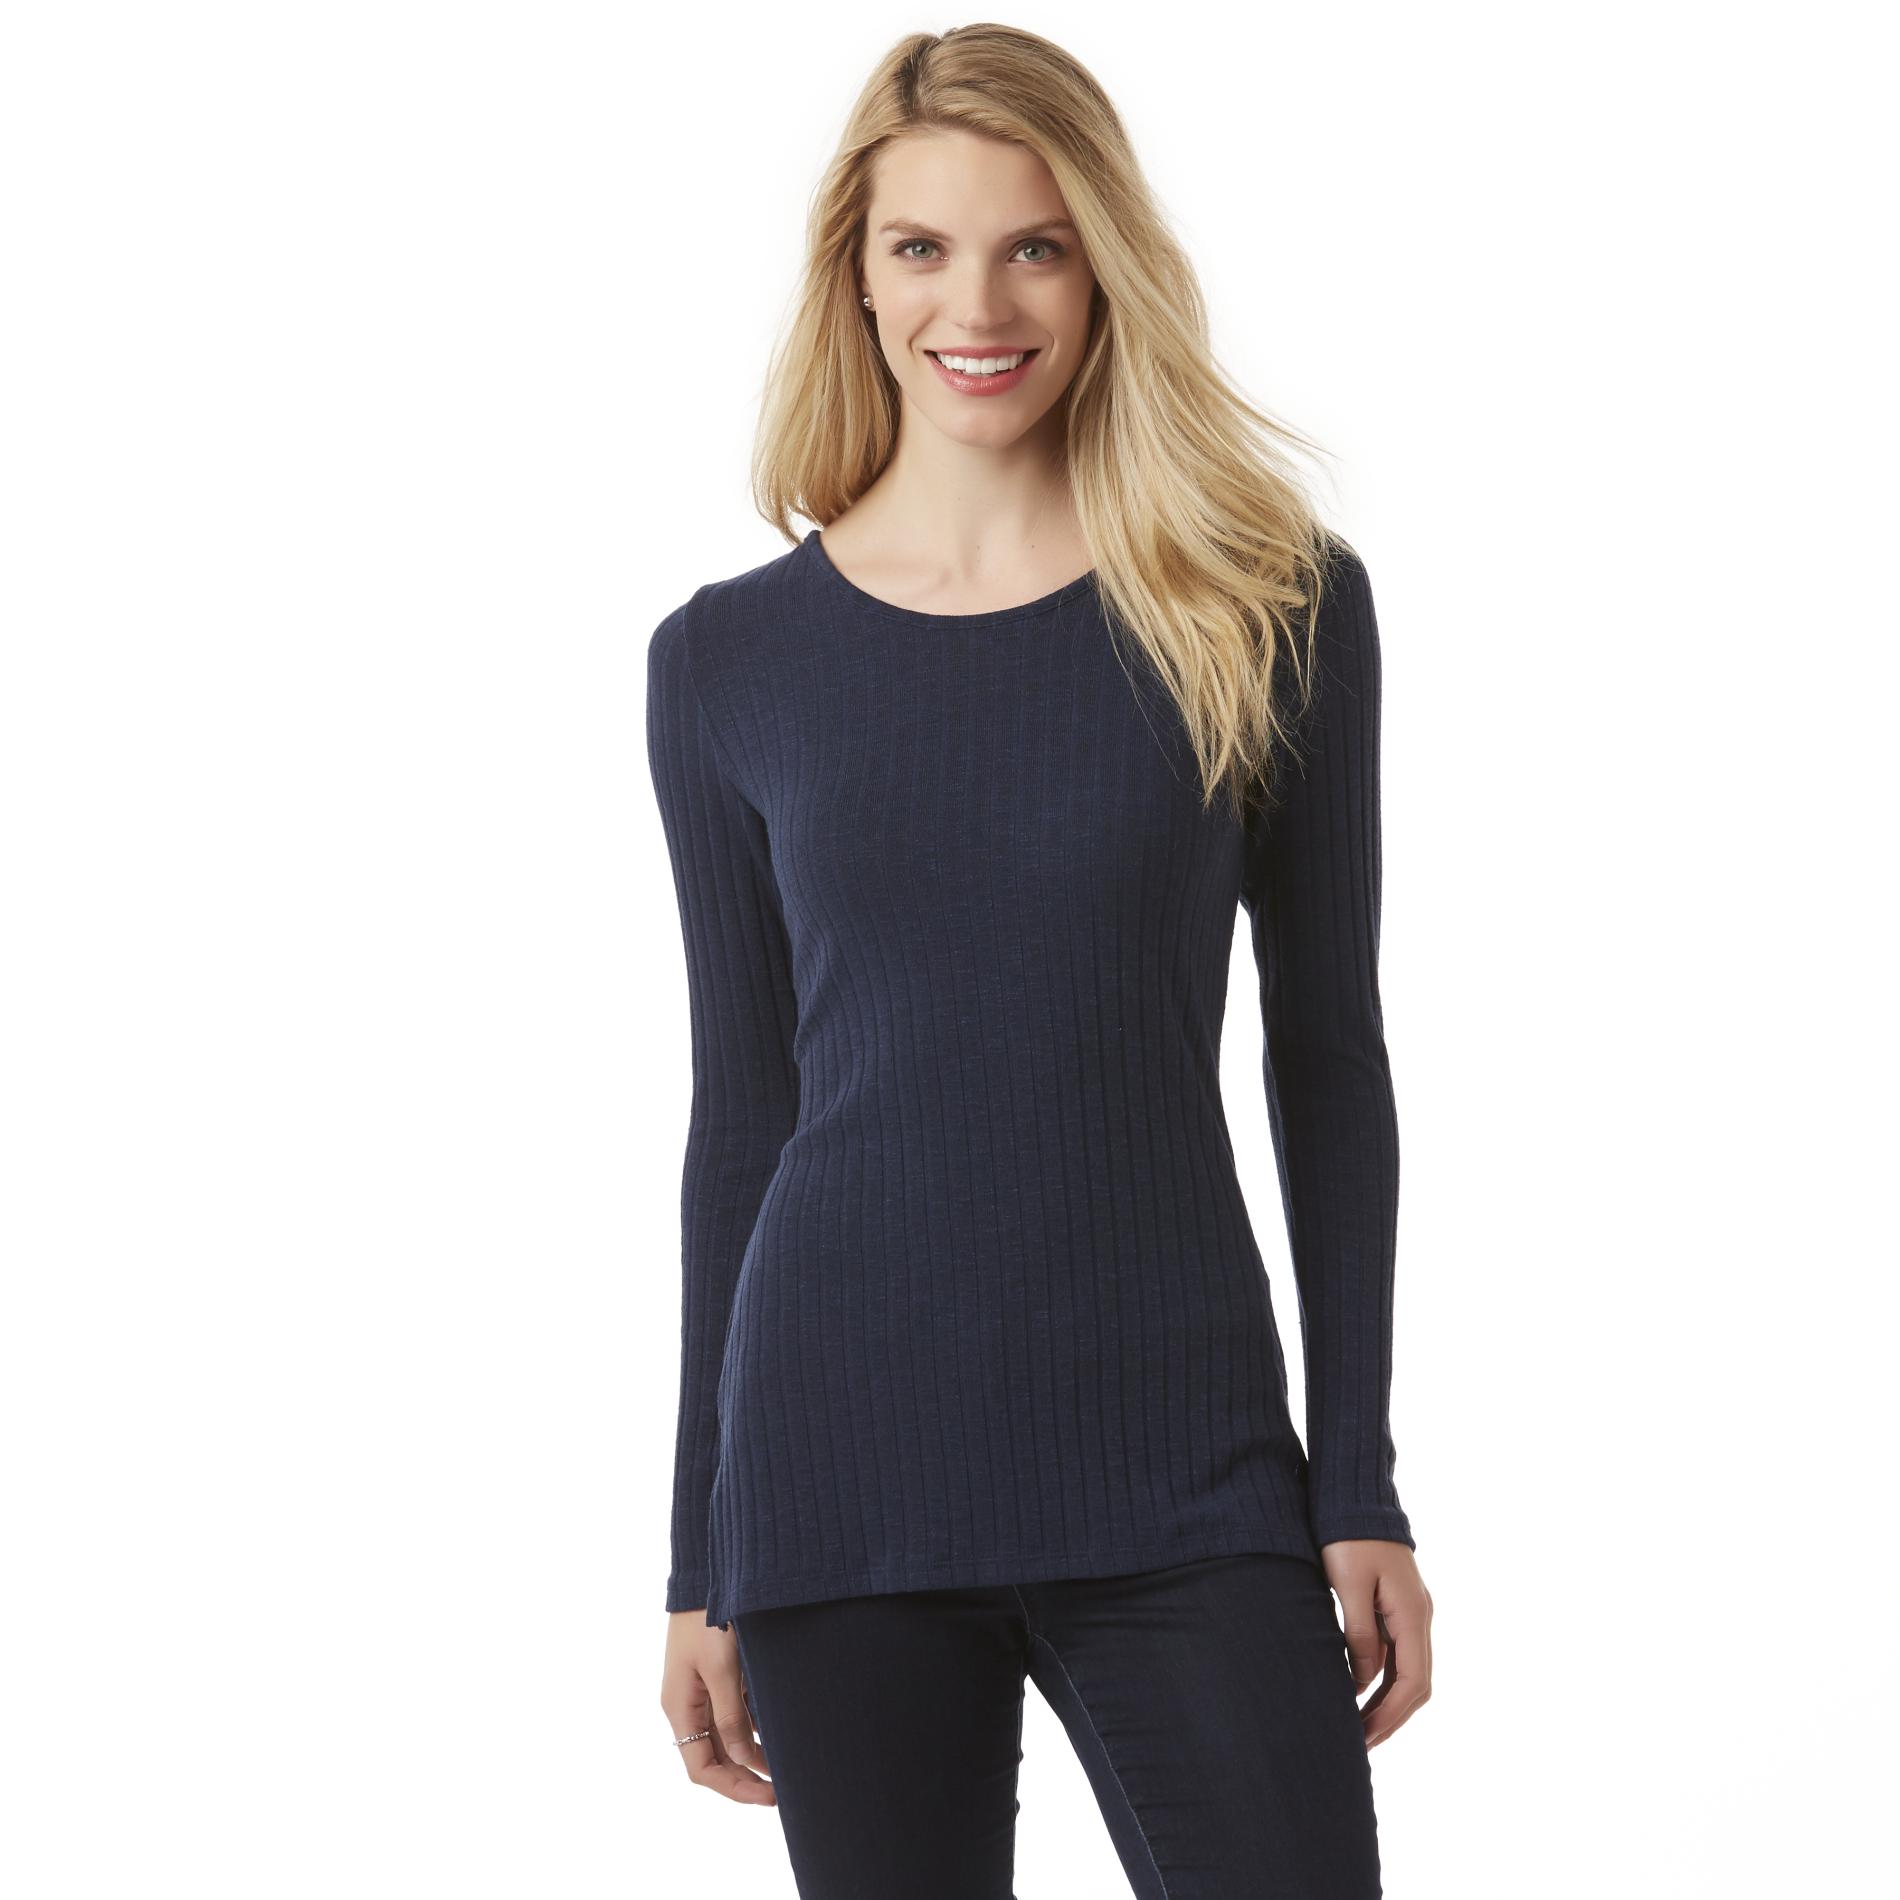 Simply Styled Women's Sweater - Ribbed